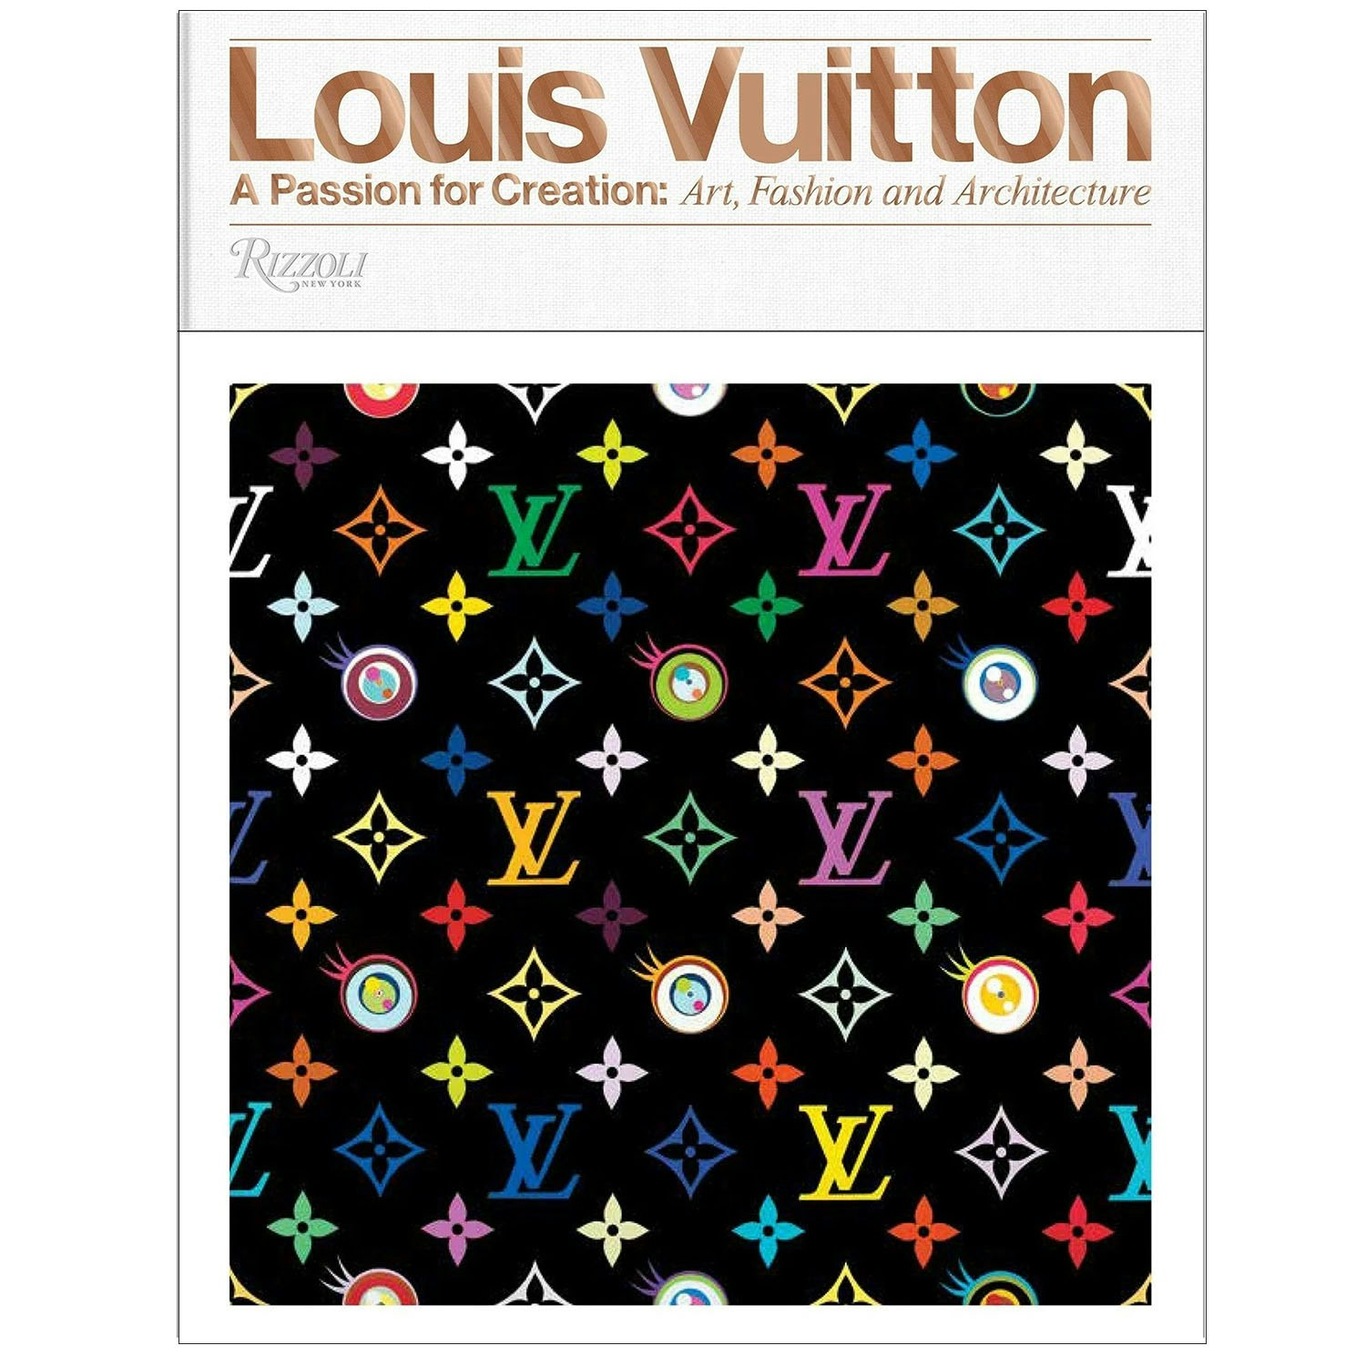 Louis Vuitton – A Passion for Creation Book